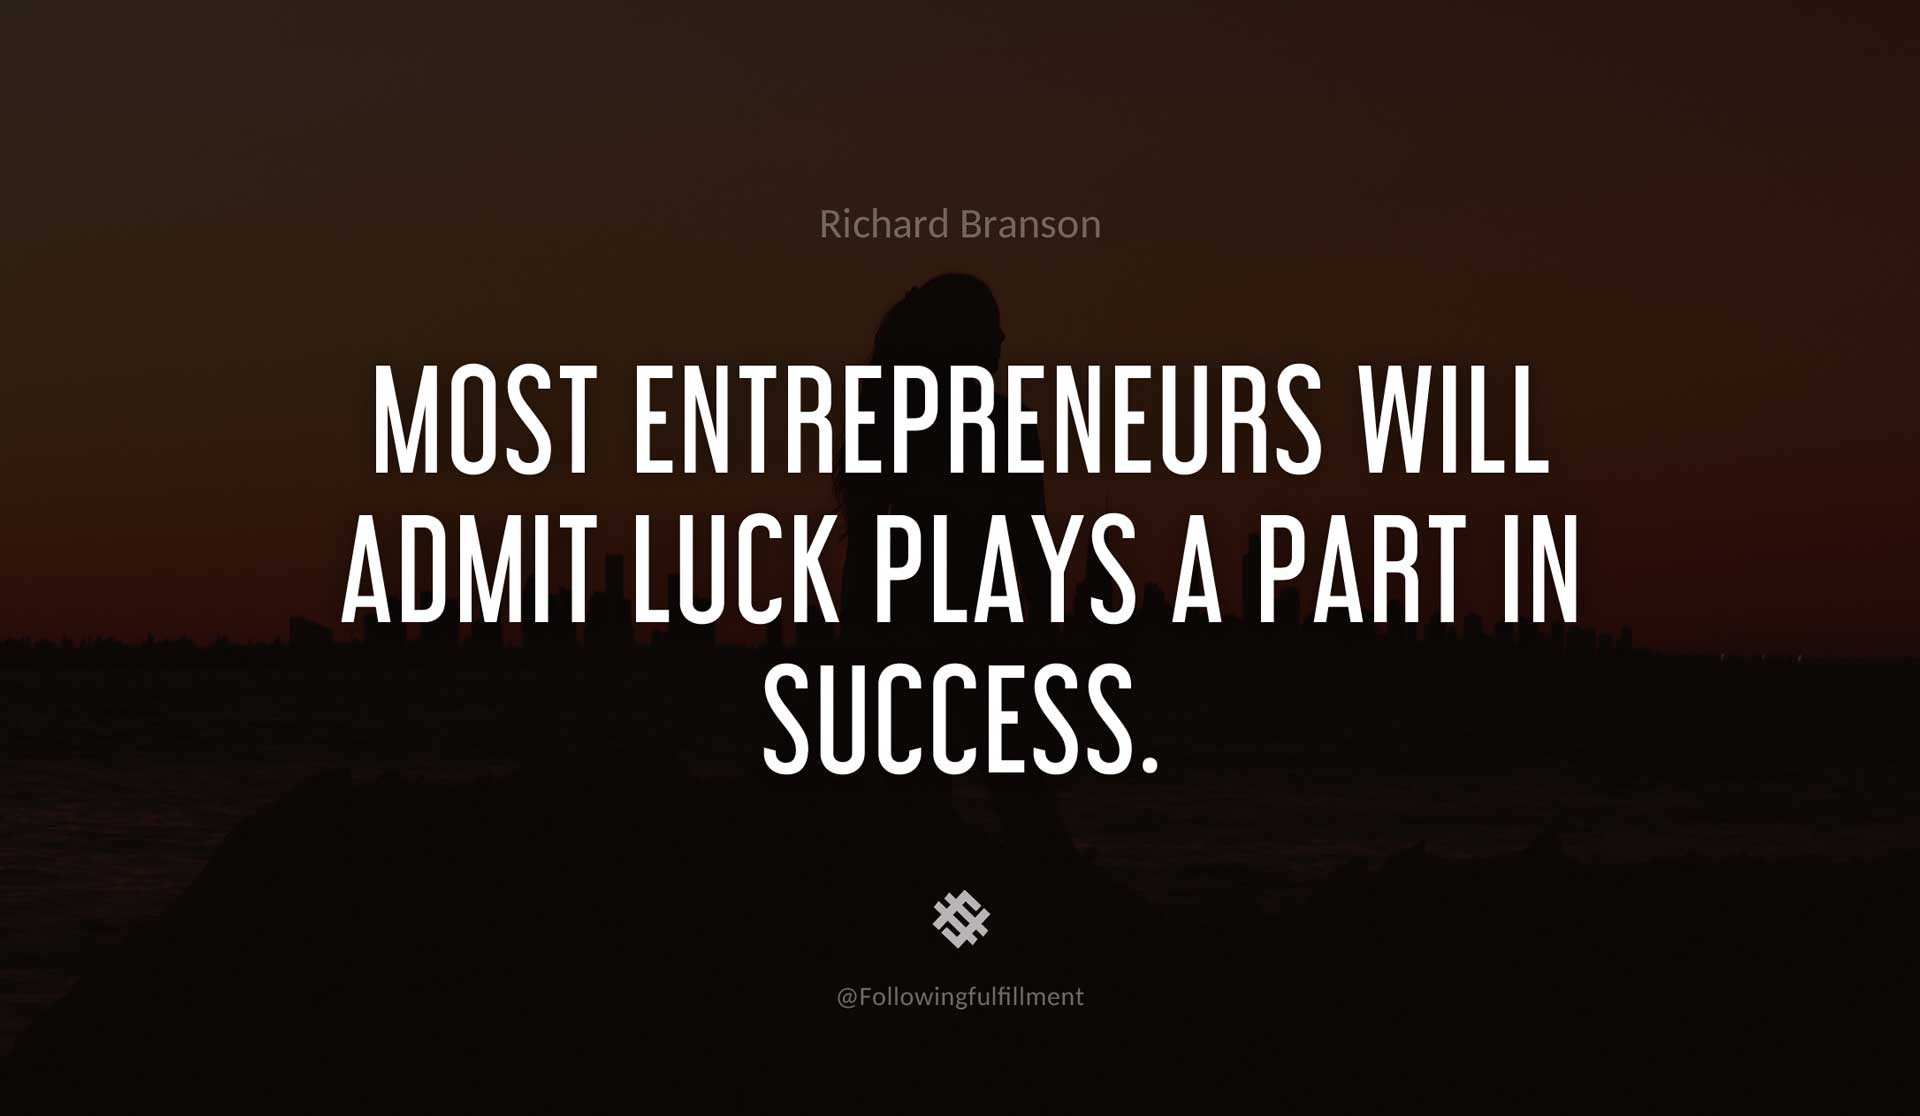 Most-entrepreneurs-will-admit-luck-plays-a-part-in-success.-RICHARD-BRANSON-Quote.jpg